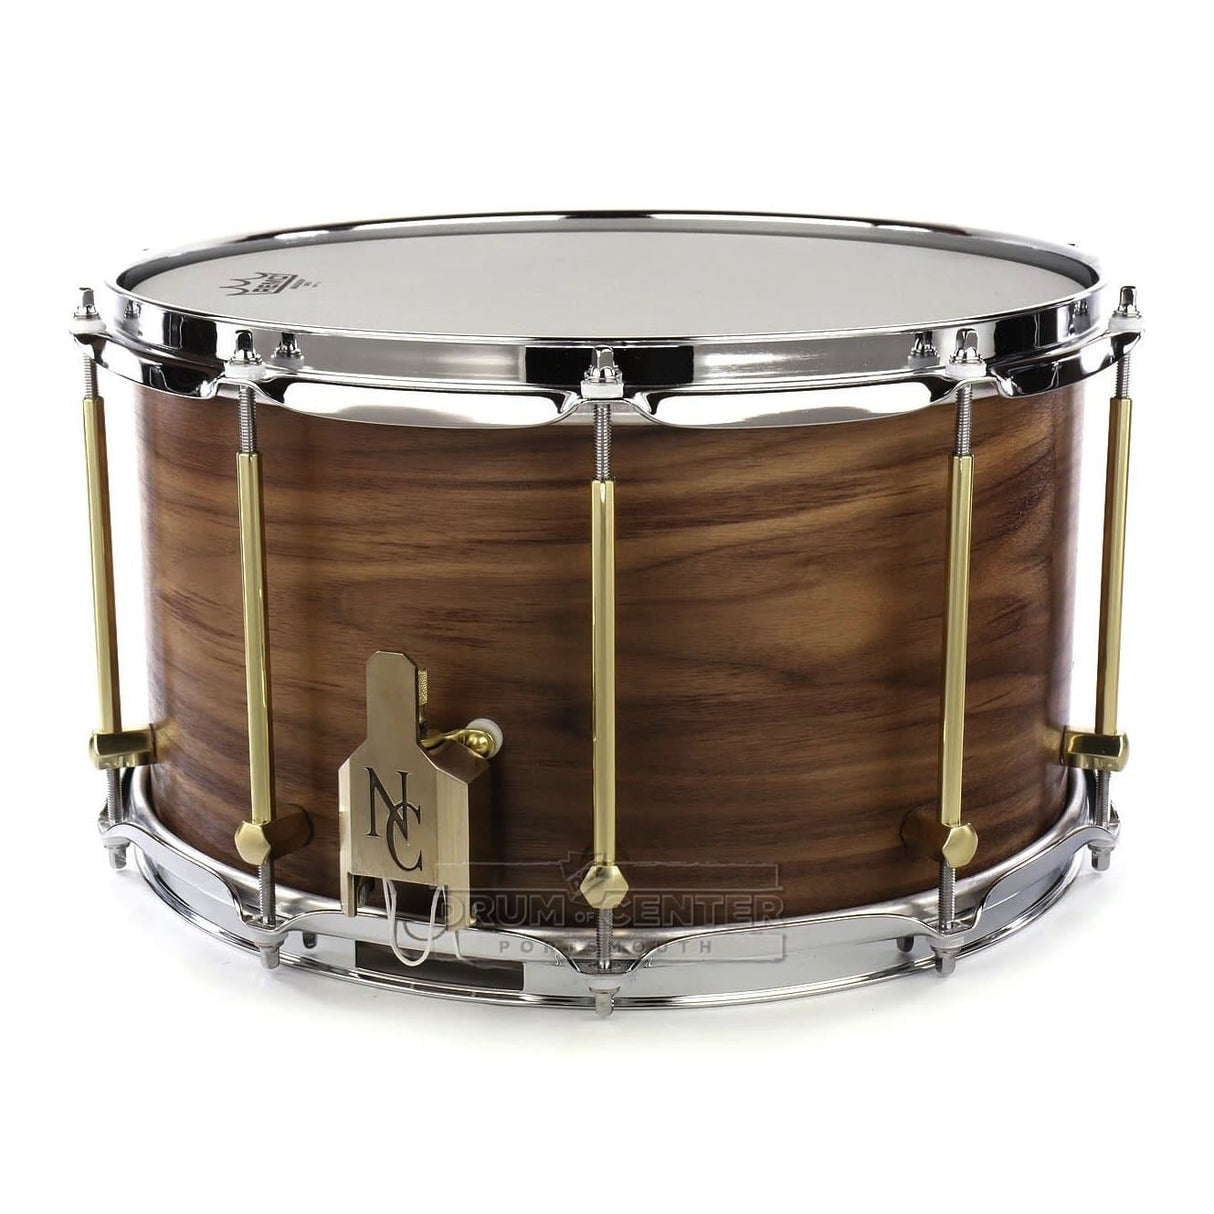 Noble & Cooley Solid Shell Classic Walnut Snare Drum 14x8 Natural Oil